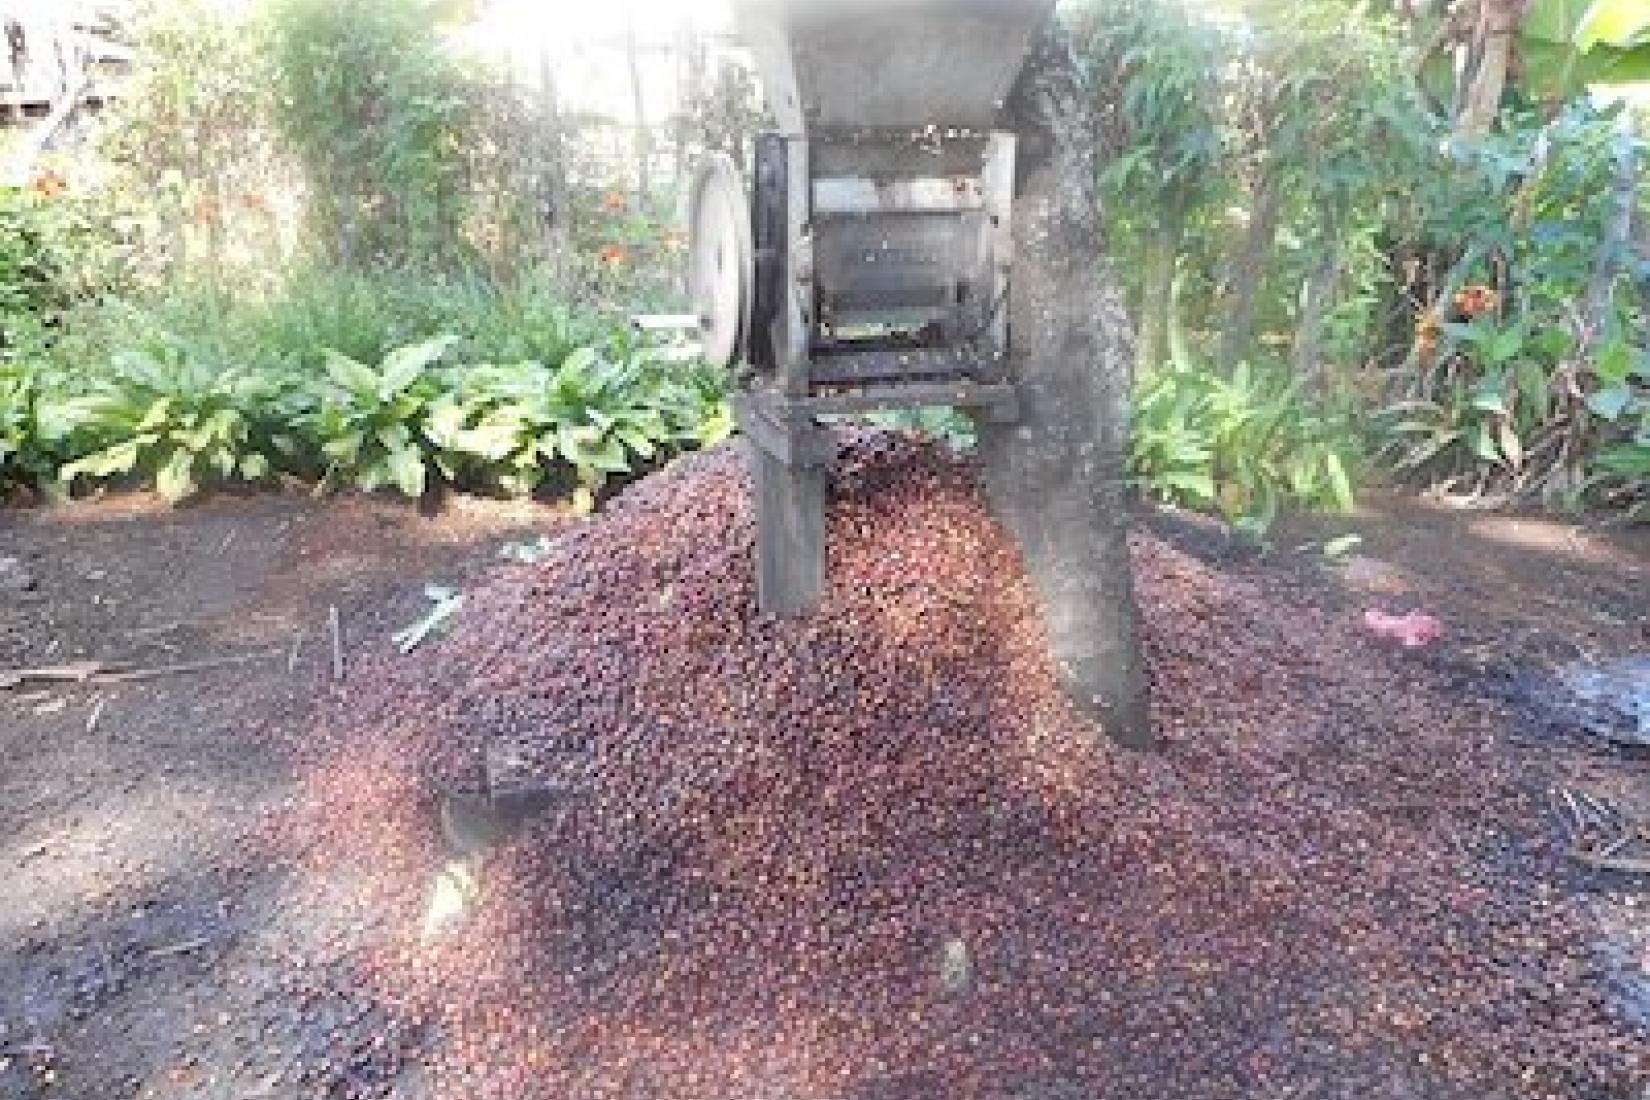 Nutrient rich coffee pulp left at the pulping station to decompose.